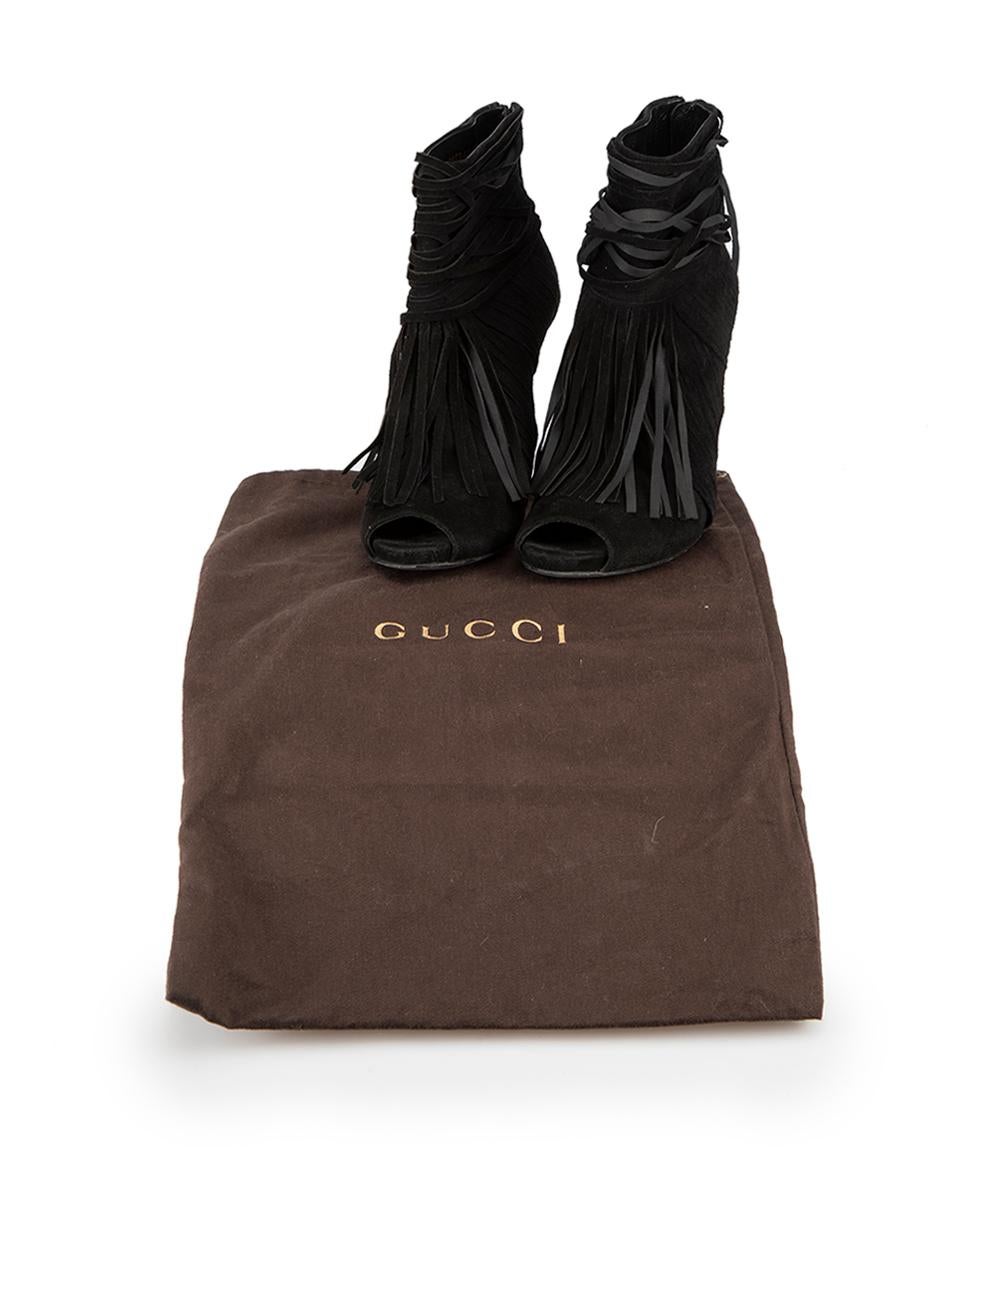 Gucci Black Suede Fringed Peep Toe Boots Size IT 39 For Sale 2